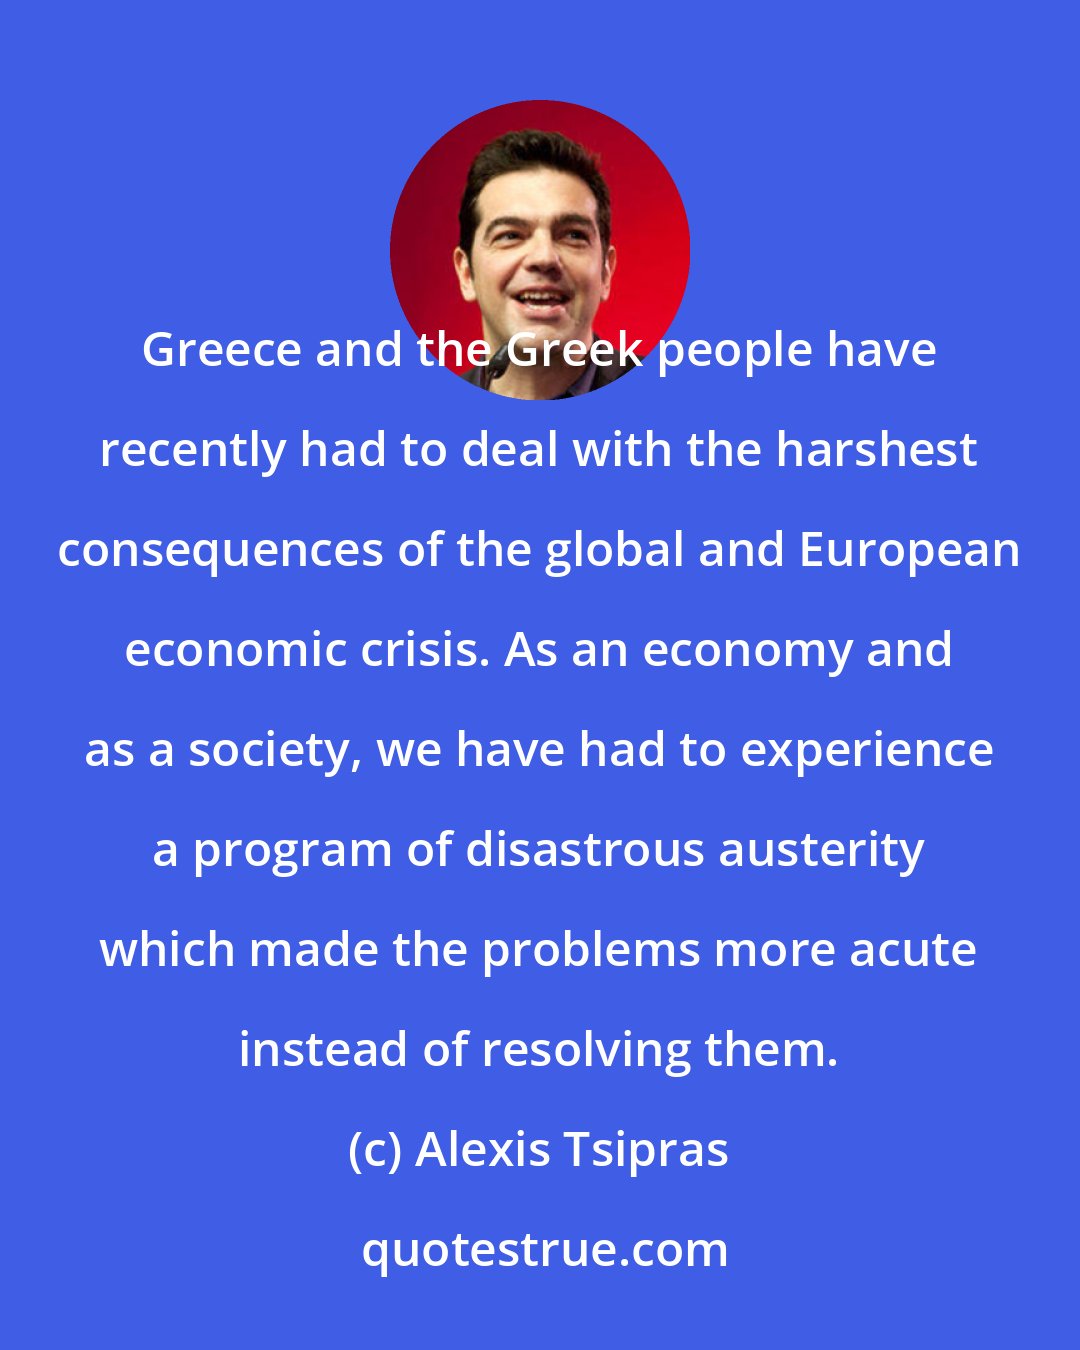 Alexis Tsipras: Greece and the Greek people have recently had to deal with the harshest consequences of the global and European economic crisis. As an economy and as a society, we have had to experience a program of disastrous austerity which made the problems more acute instead of resolving them.